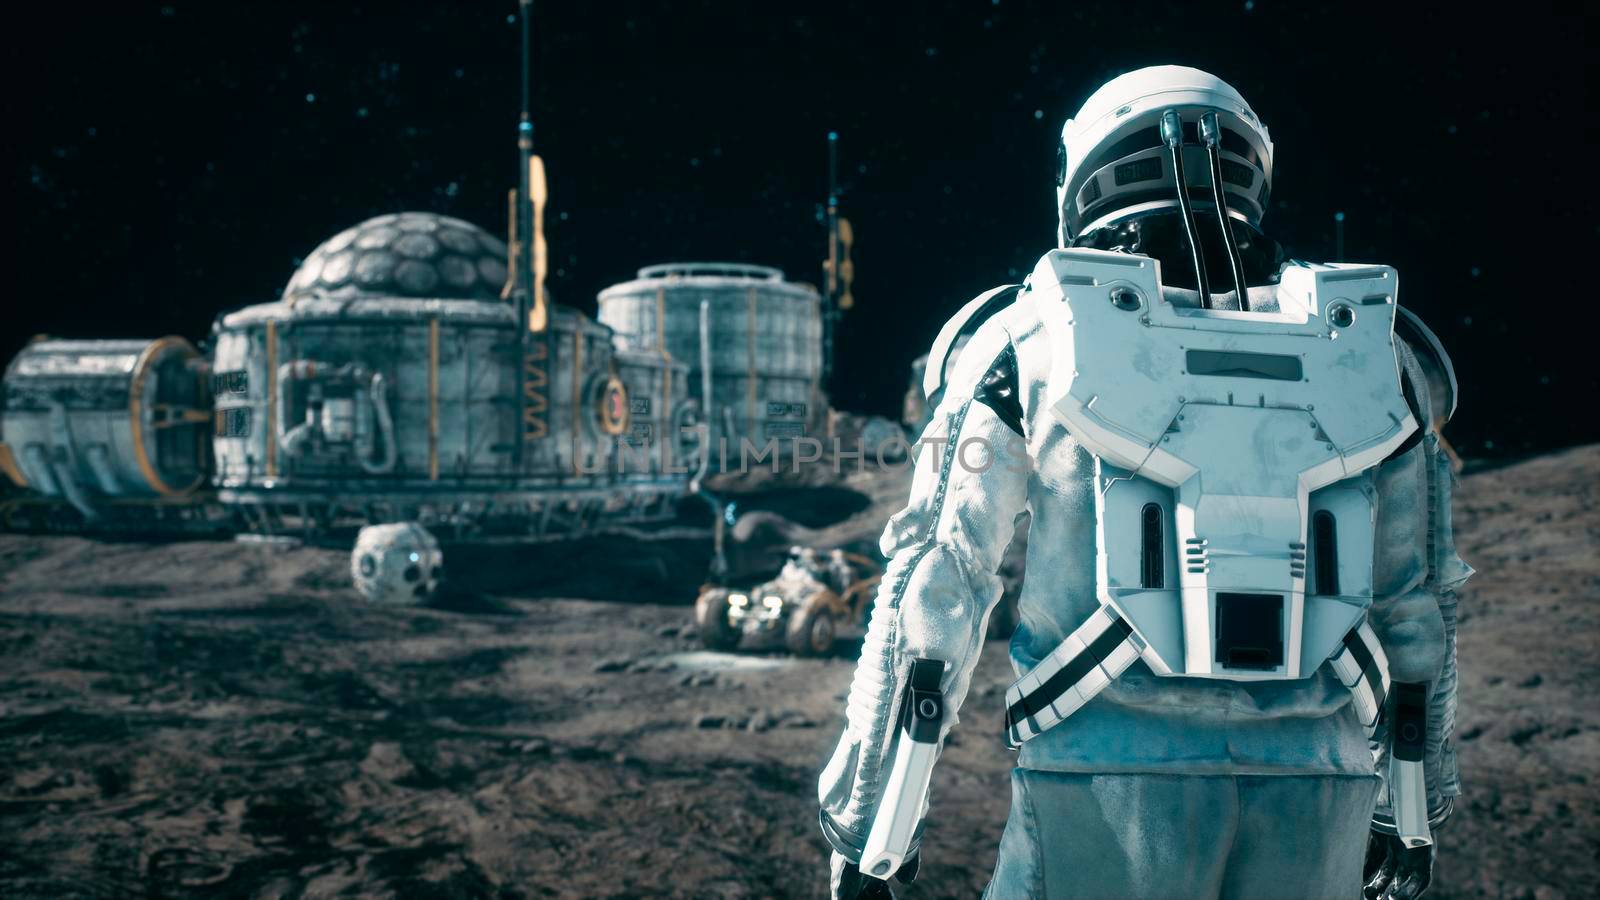 An astronaut approaches his rover at the space base of the future. Concept of the future space colony.